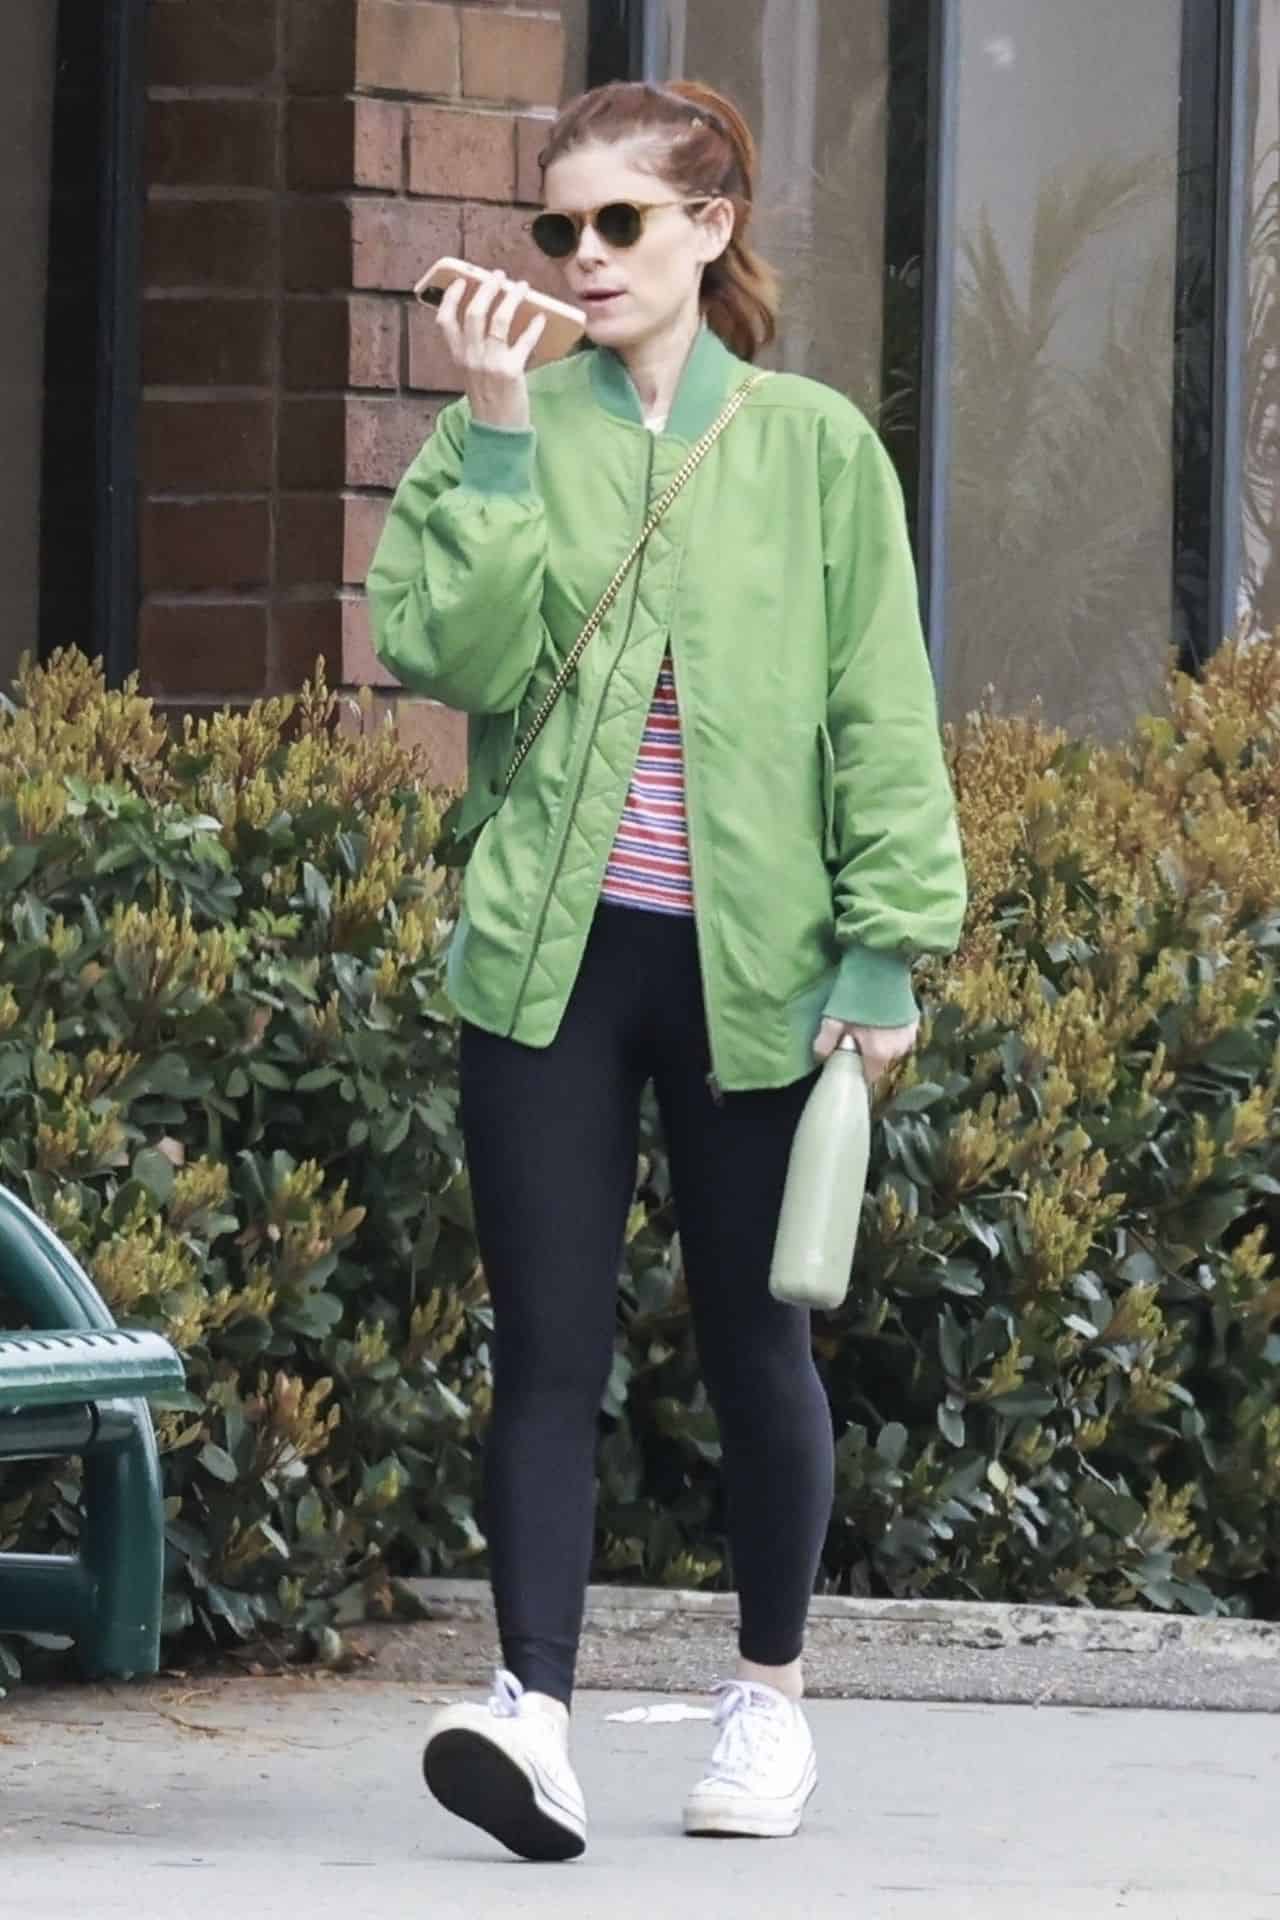 Kate Mara Embraces Casual Chic in Vibrant Green Jacket and Black Leggings